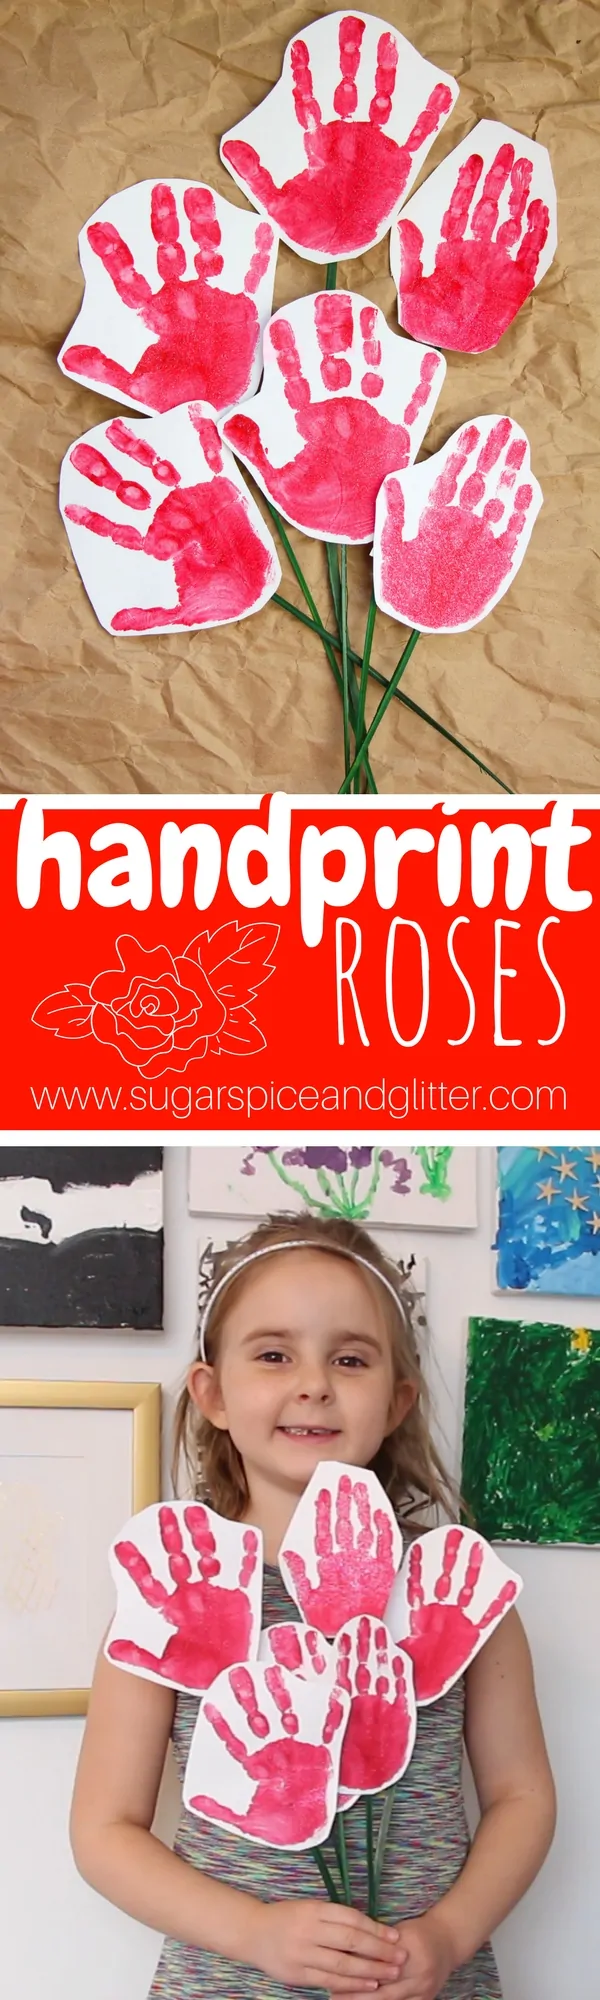 Kids will be so proud to give these handprint roses for Valentine's Day or as a Mother's Day craft